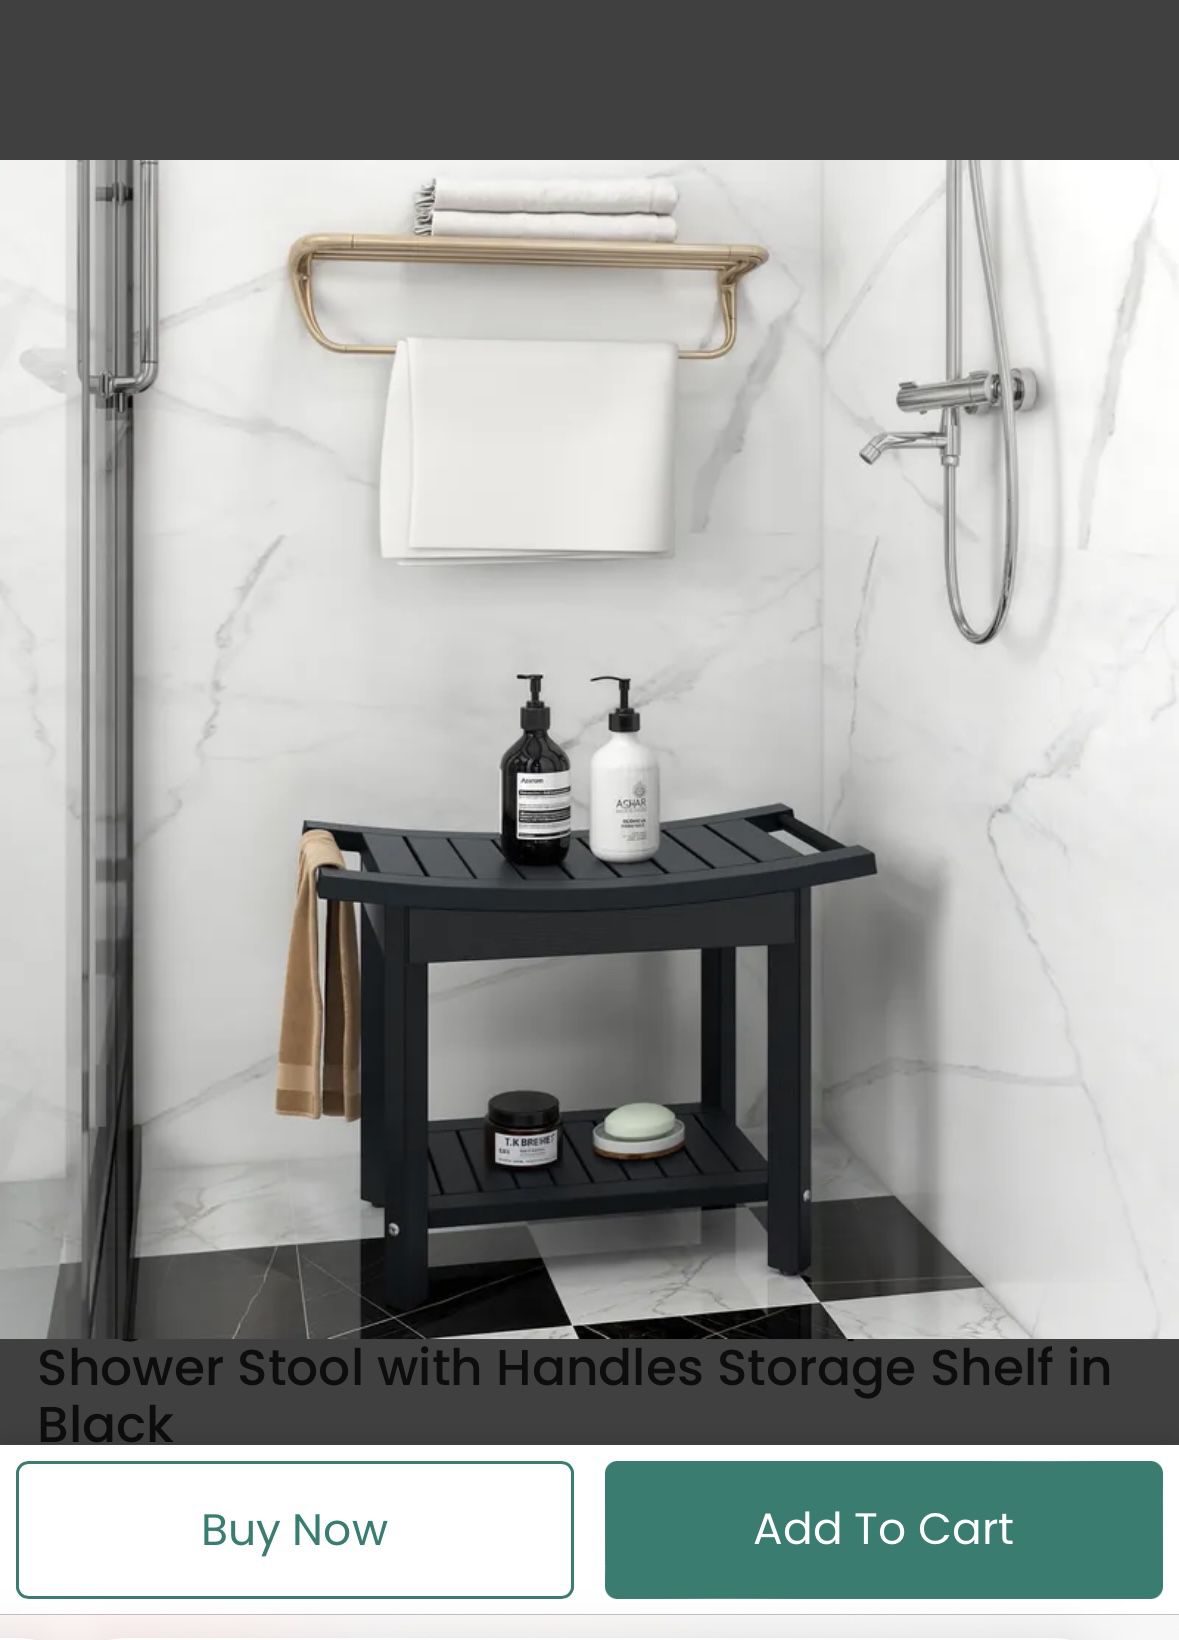 Large Water Resistant & Non-Slip Bath Shower Stool with Handles Storage Shelf in Black